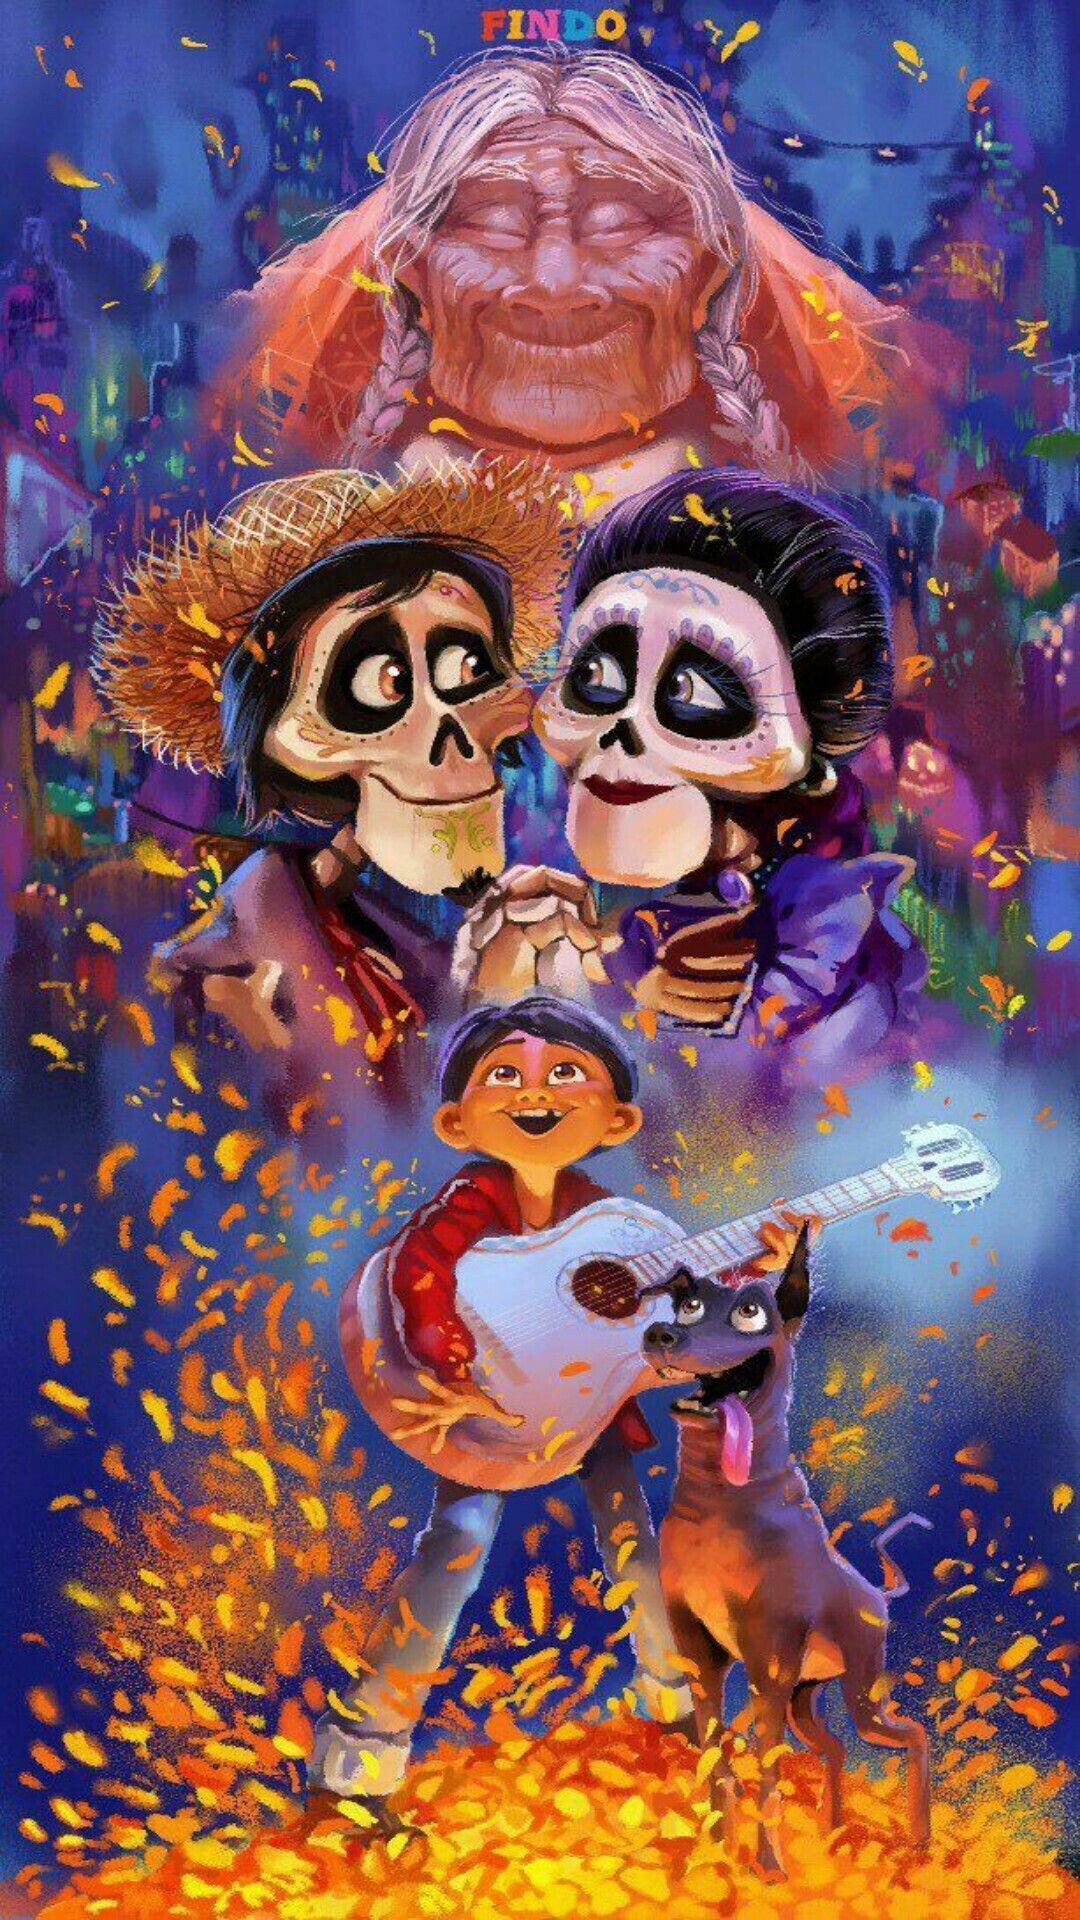 Coco (Cartoon): An animated film about a 12-year-old Mexican boy who dreams of being a musician, Disney, Pixar. 1080x1920 Full HD Background.